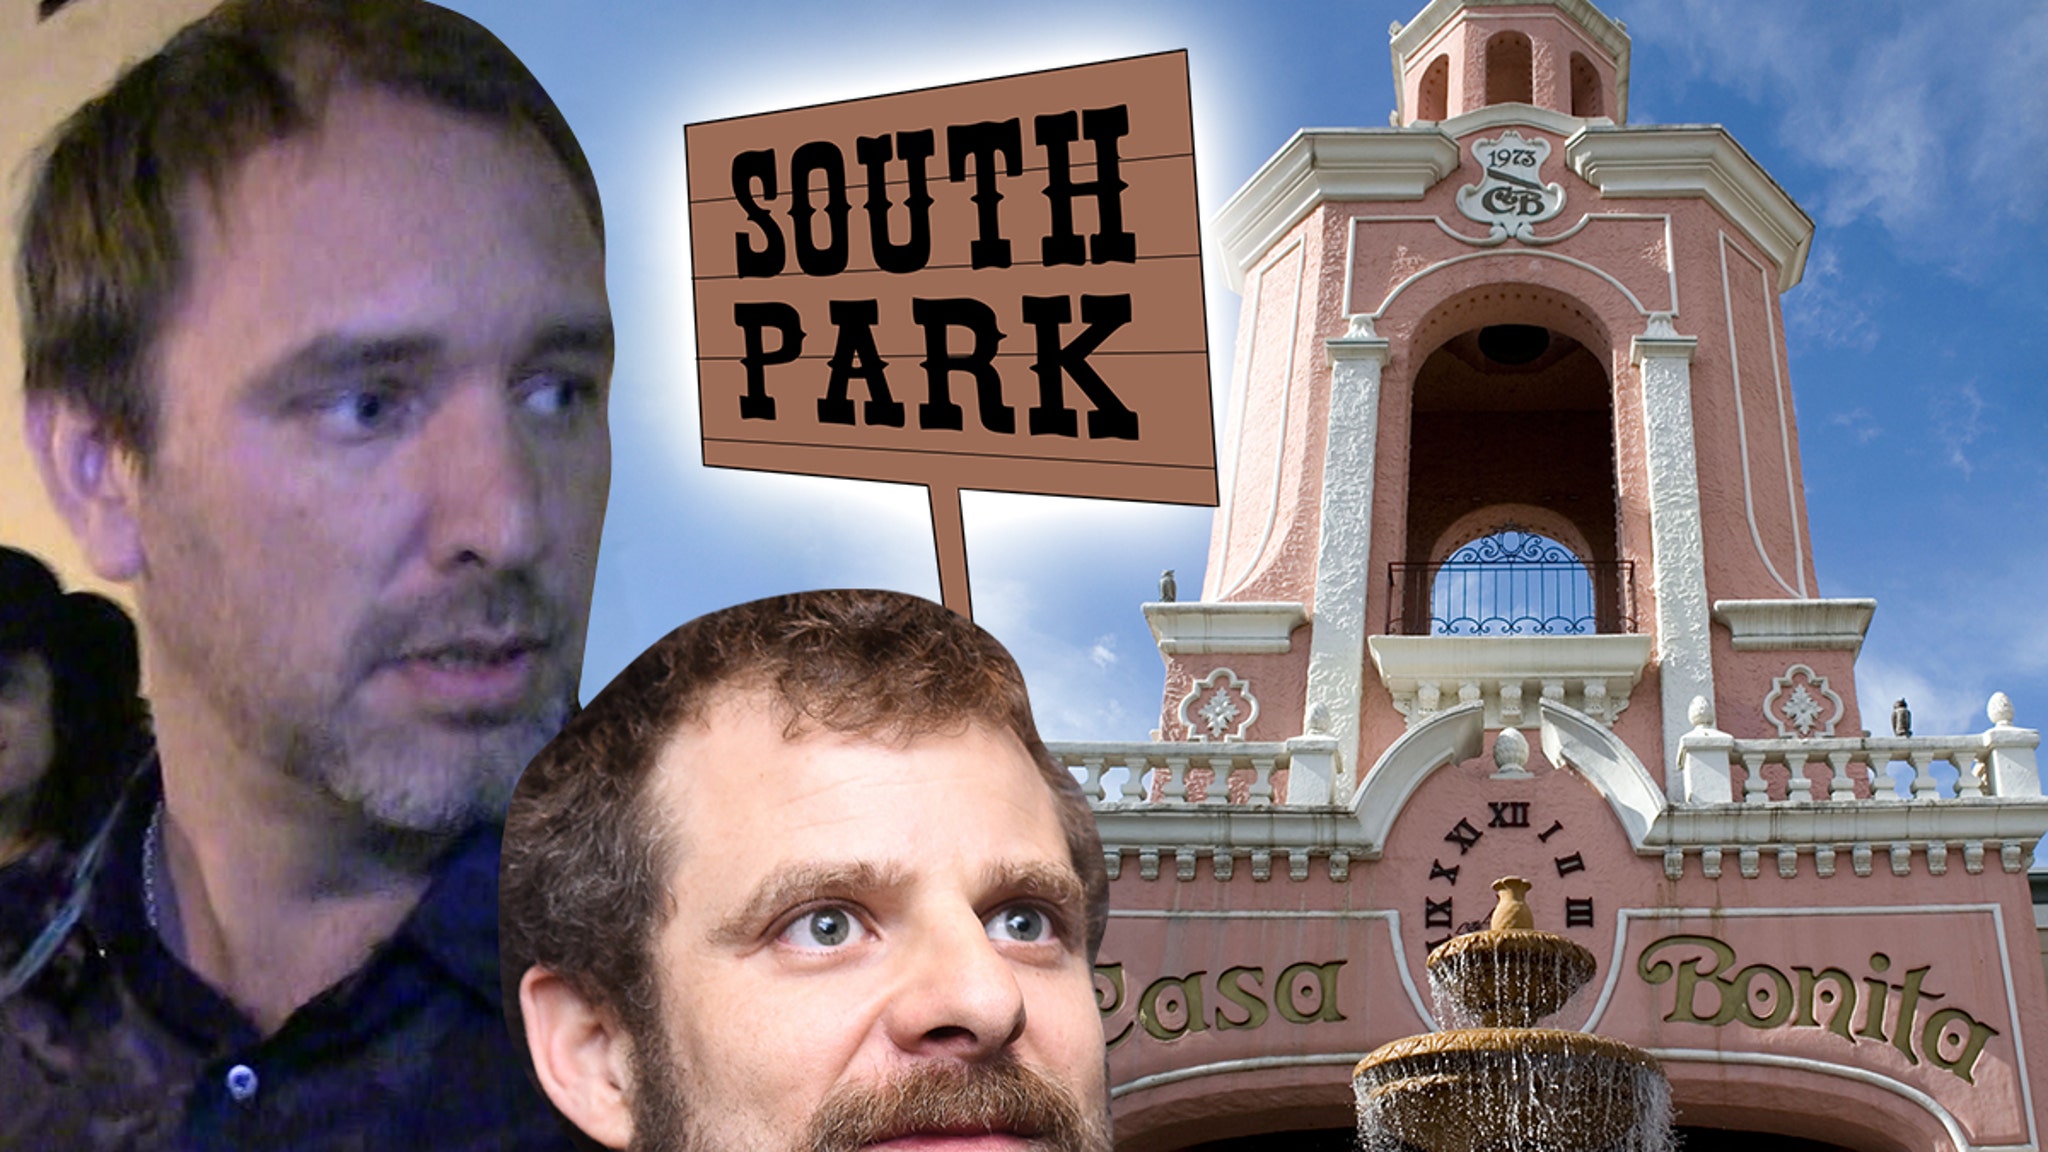 'South Park' Creators Want To Buy Real Casa Bonita, But It's Not For Sale